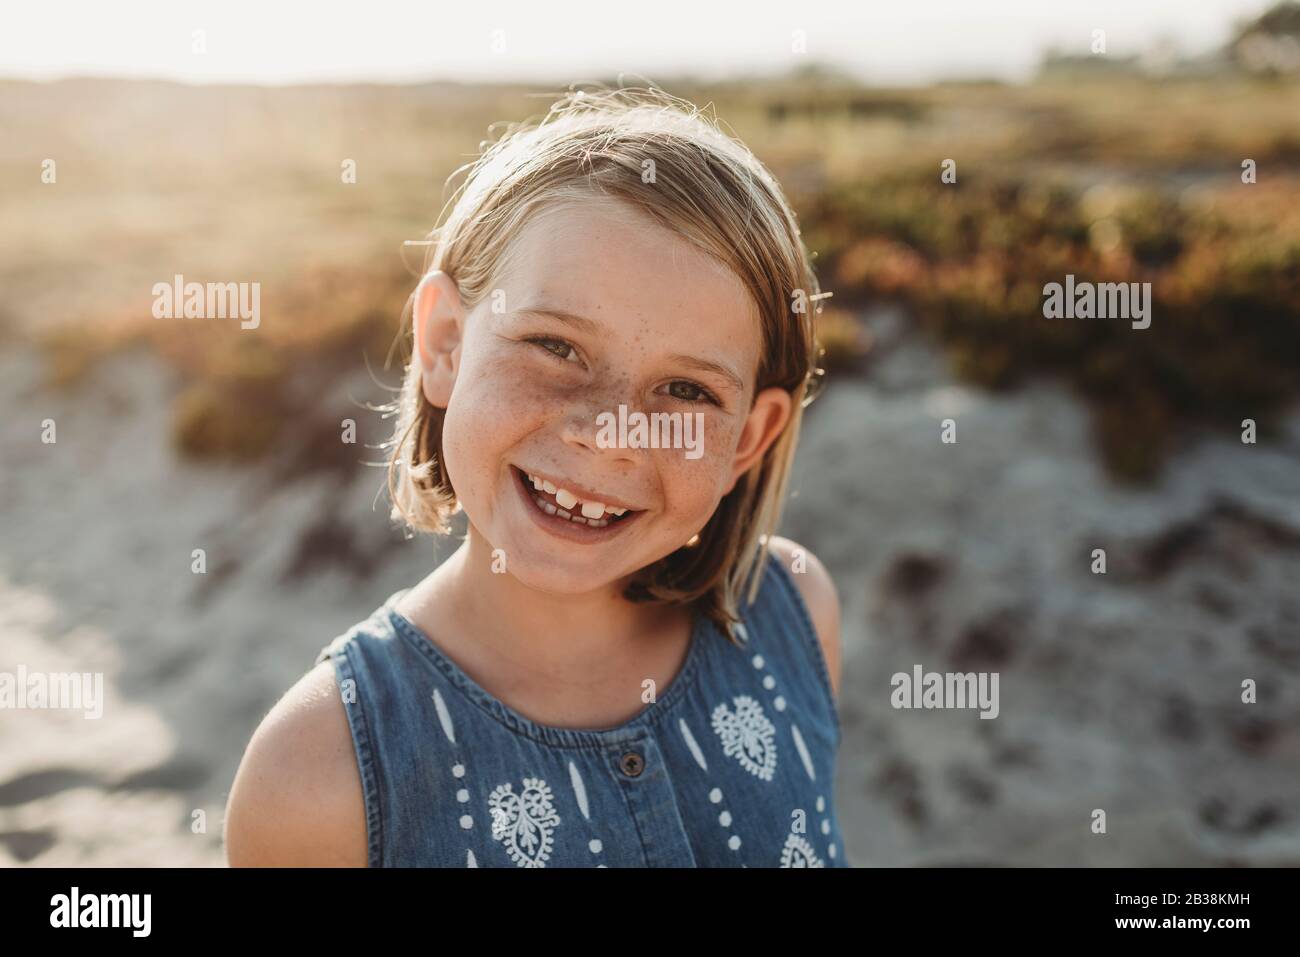 Portrait of young school age girl with freckles smiling on beach Stock Photo